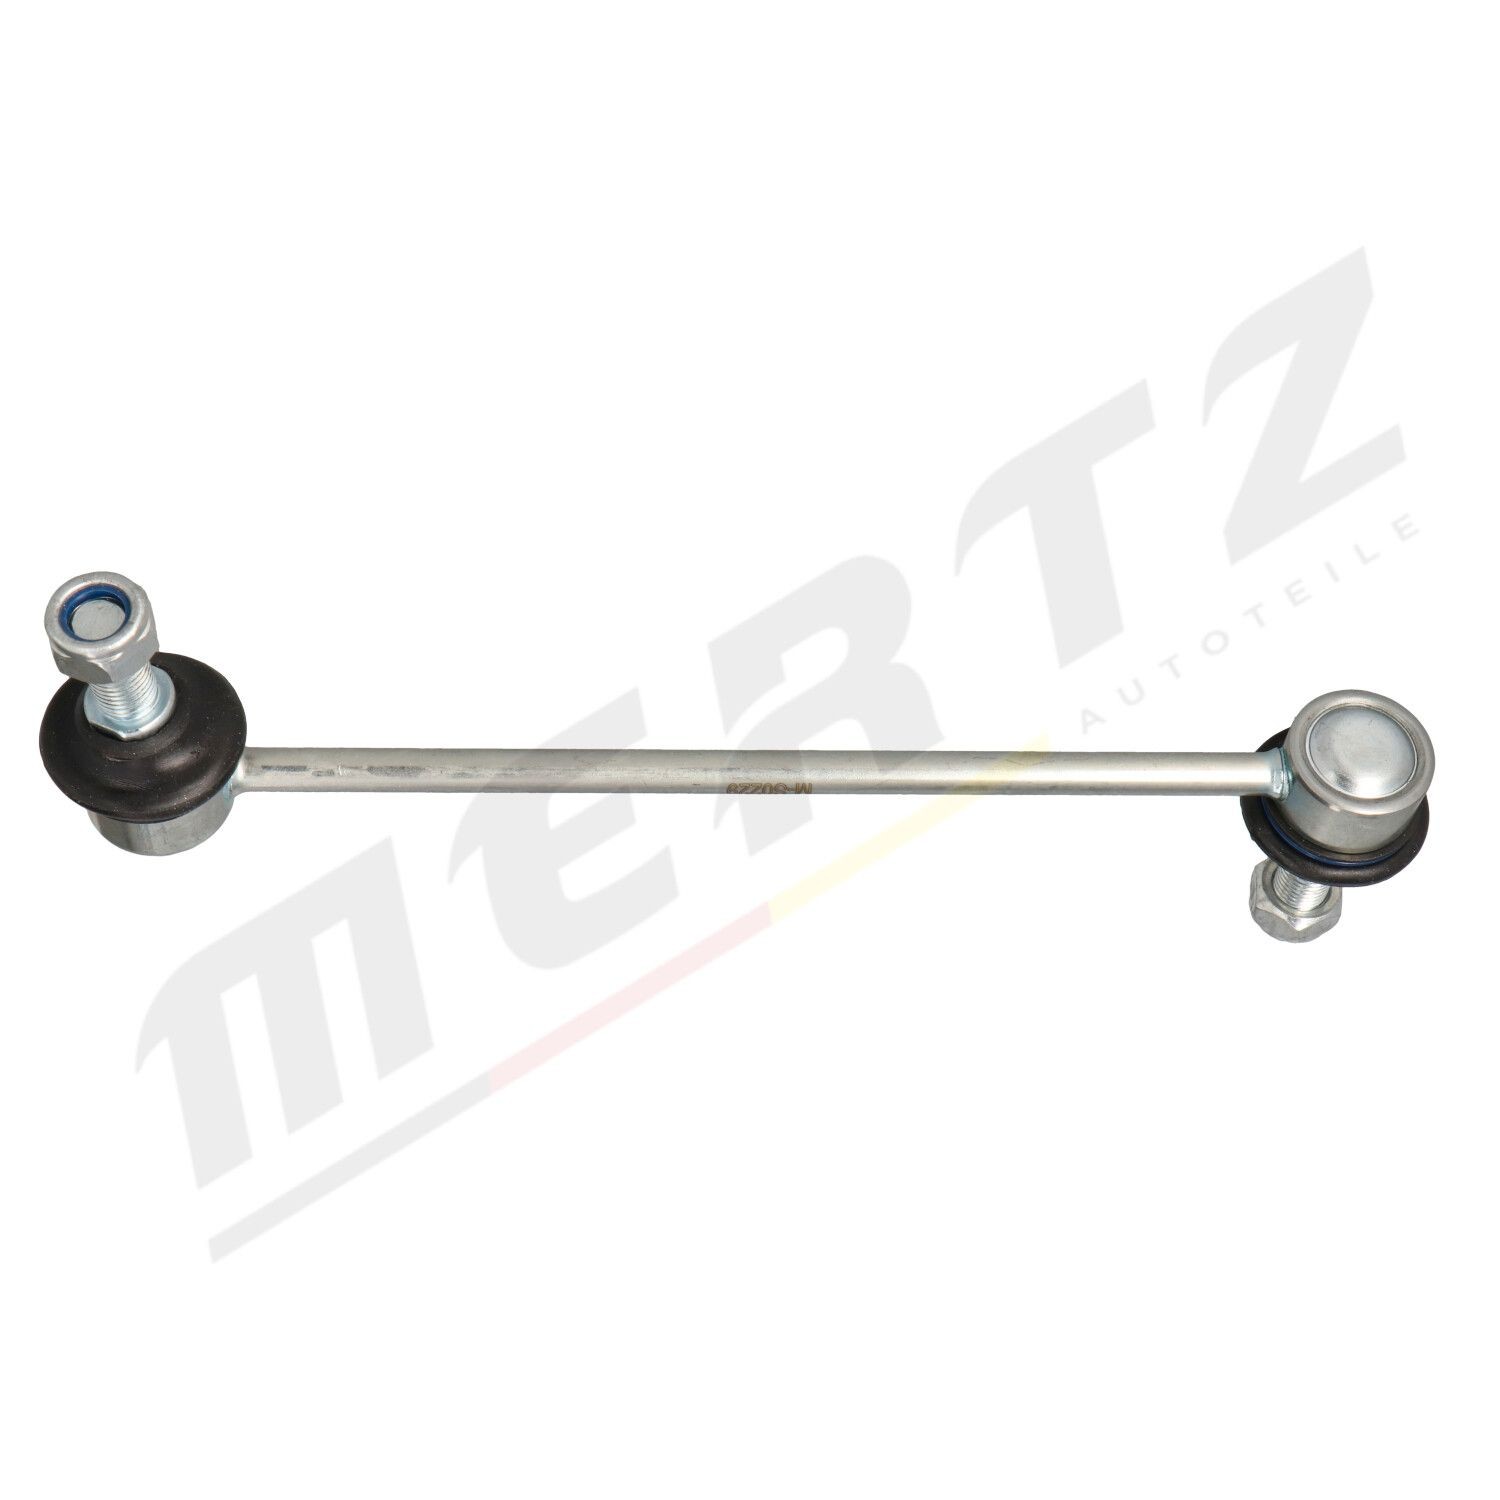 MERTZ Sway bar link rear and front BMW 5 Saloon (E60) new M-S0092